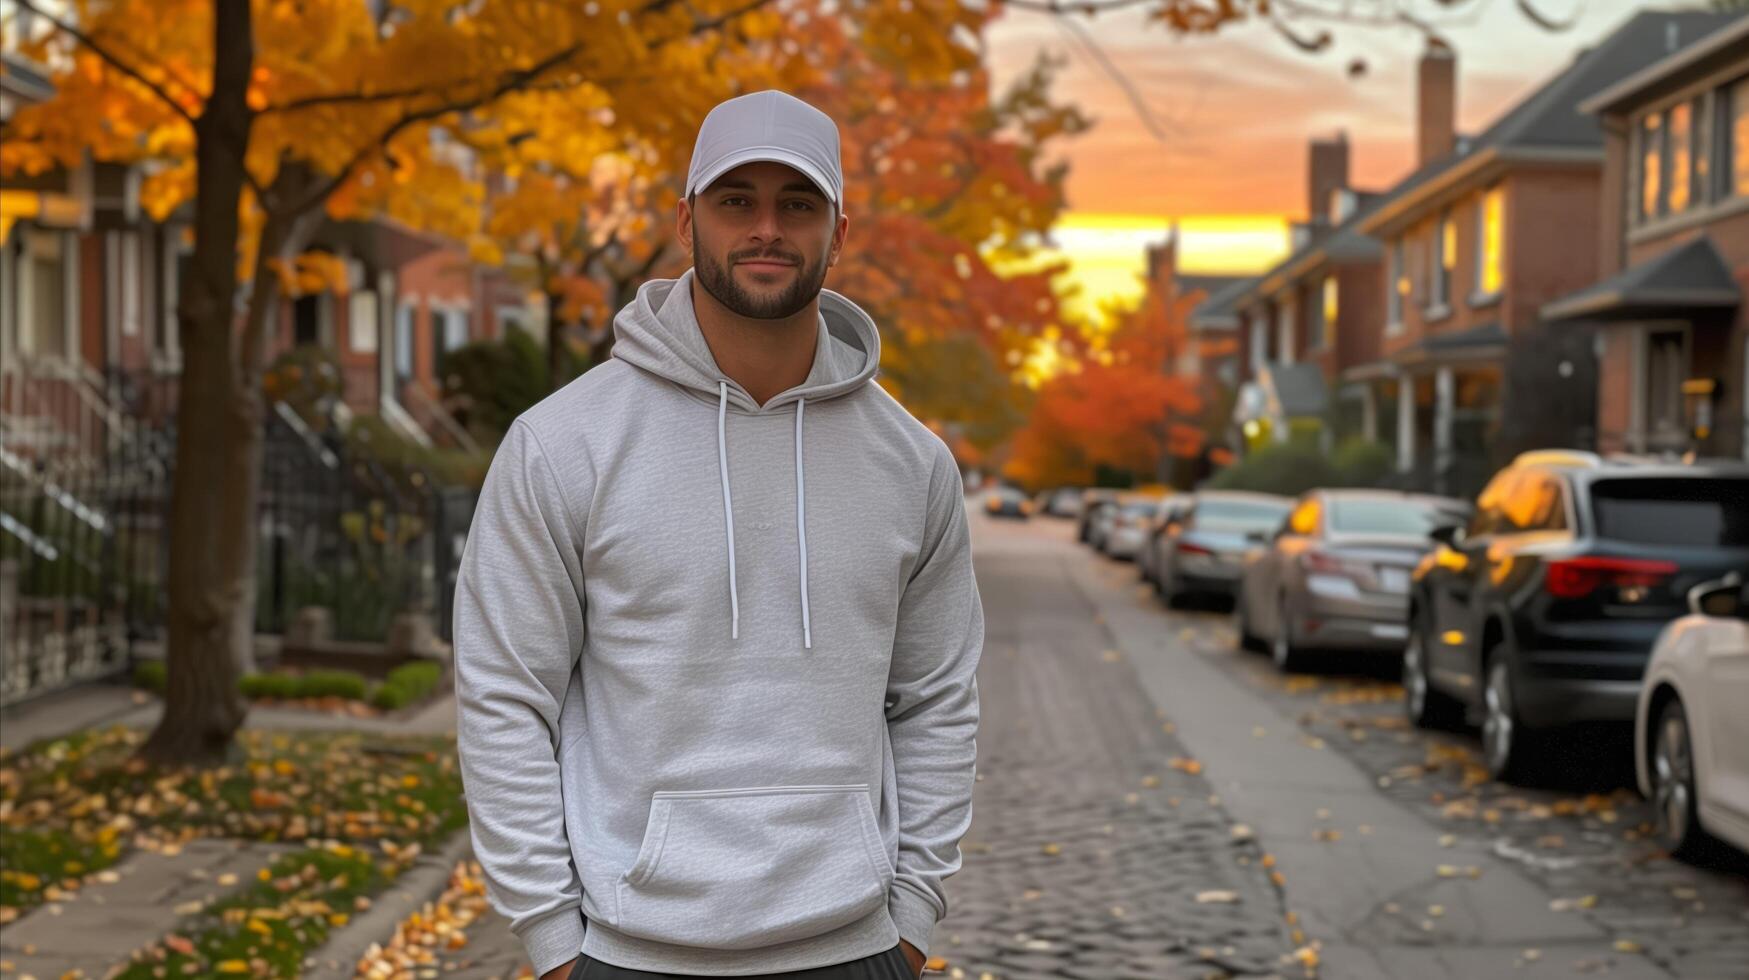 Man in Gray Hoodie Standing on a Suburban Street at Sunset photo